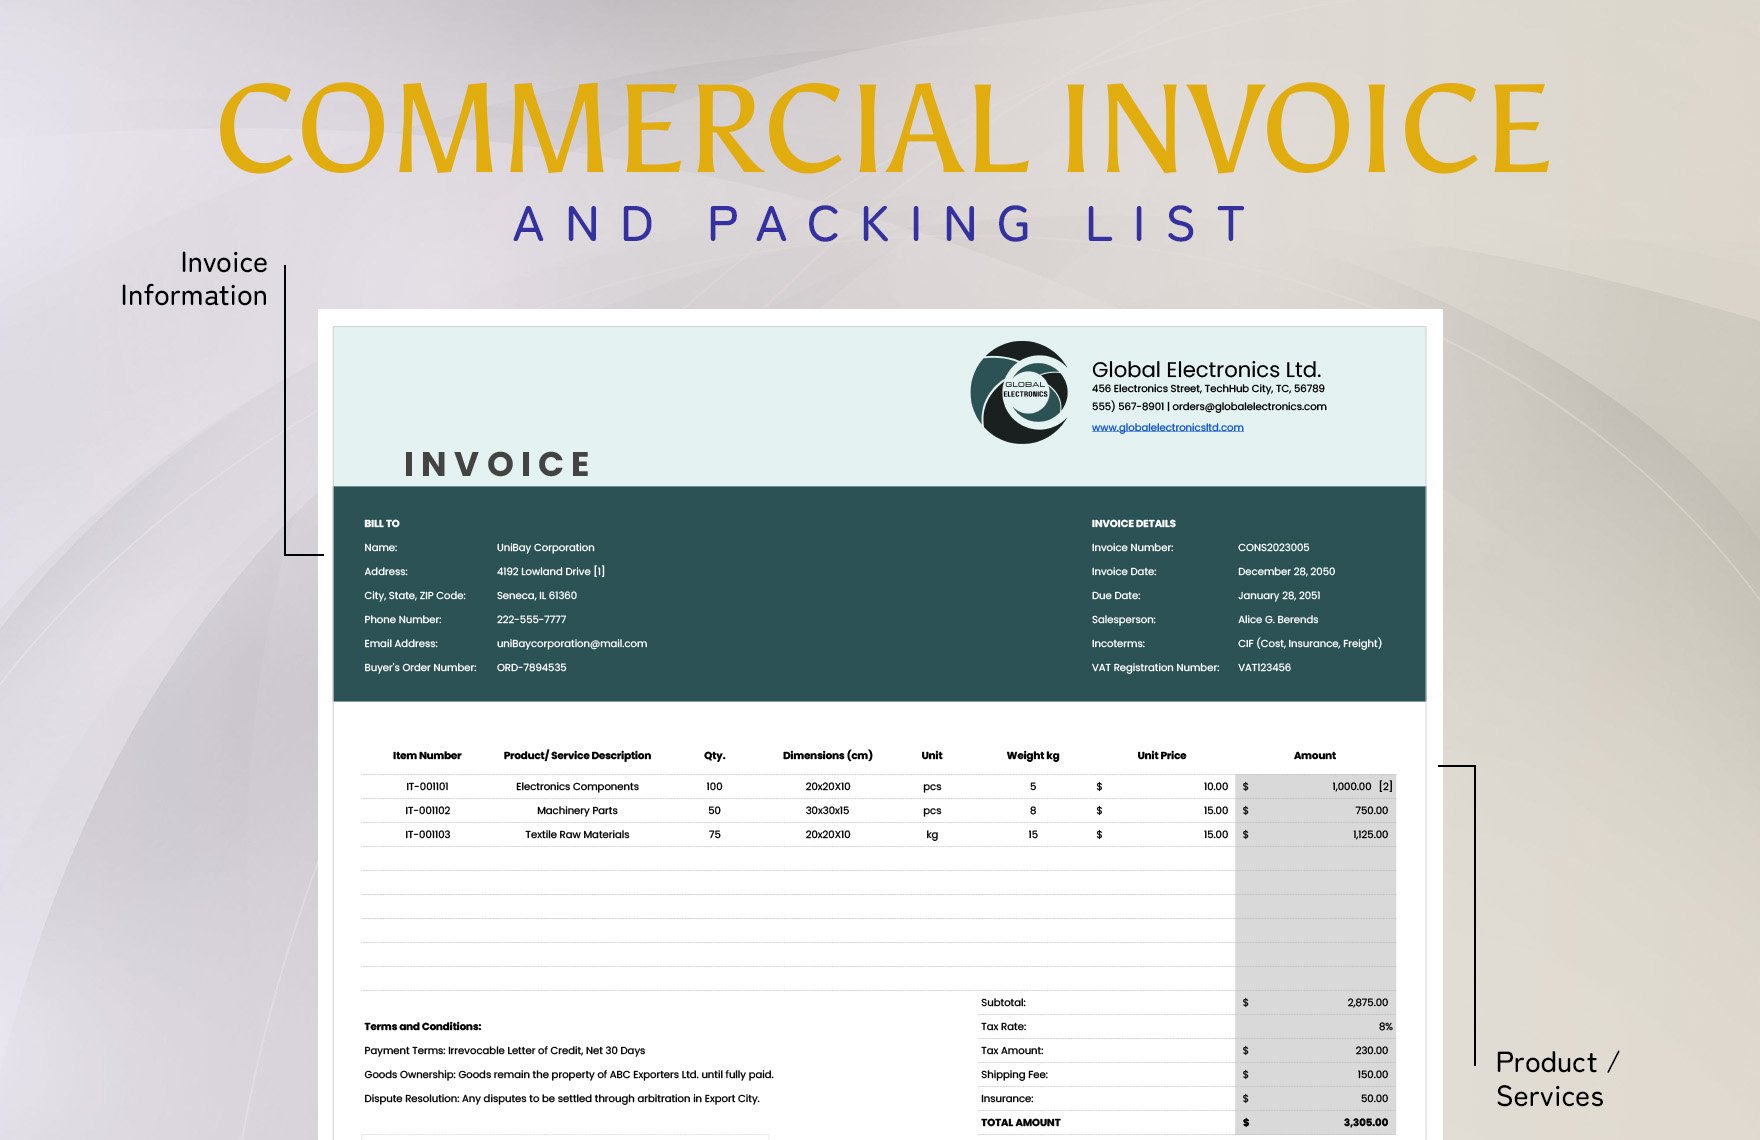 Commercial Invoice and Packing List Template